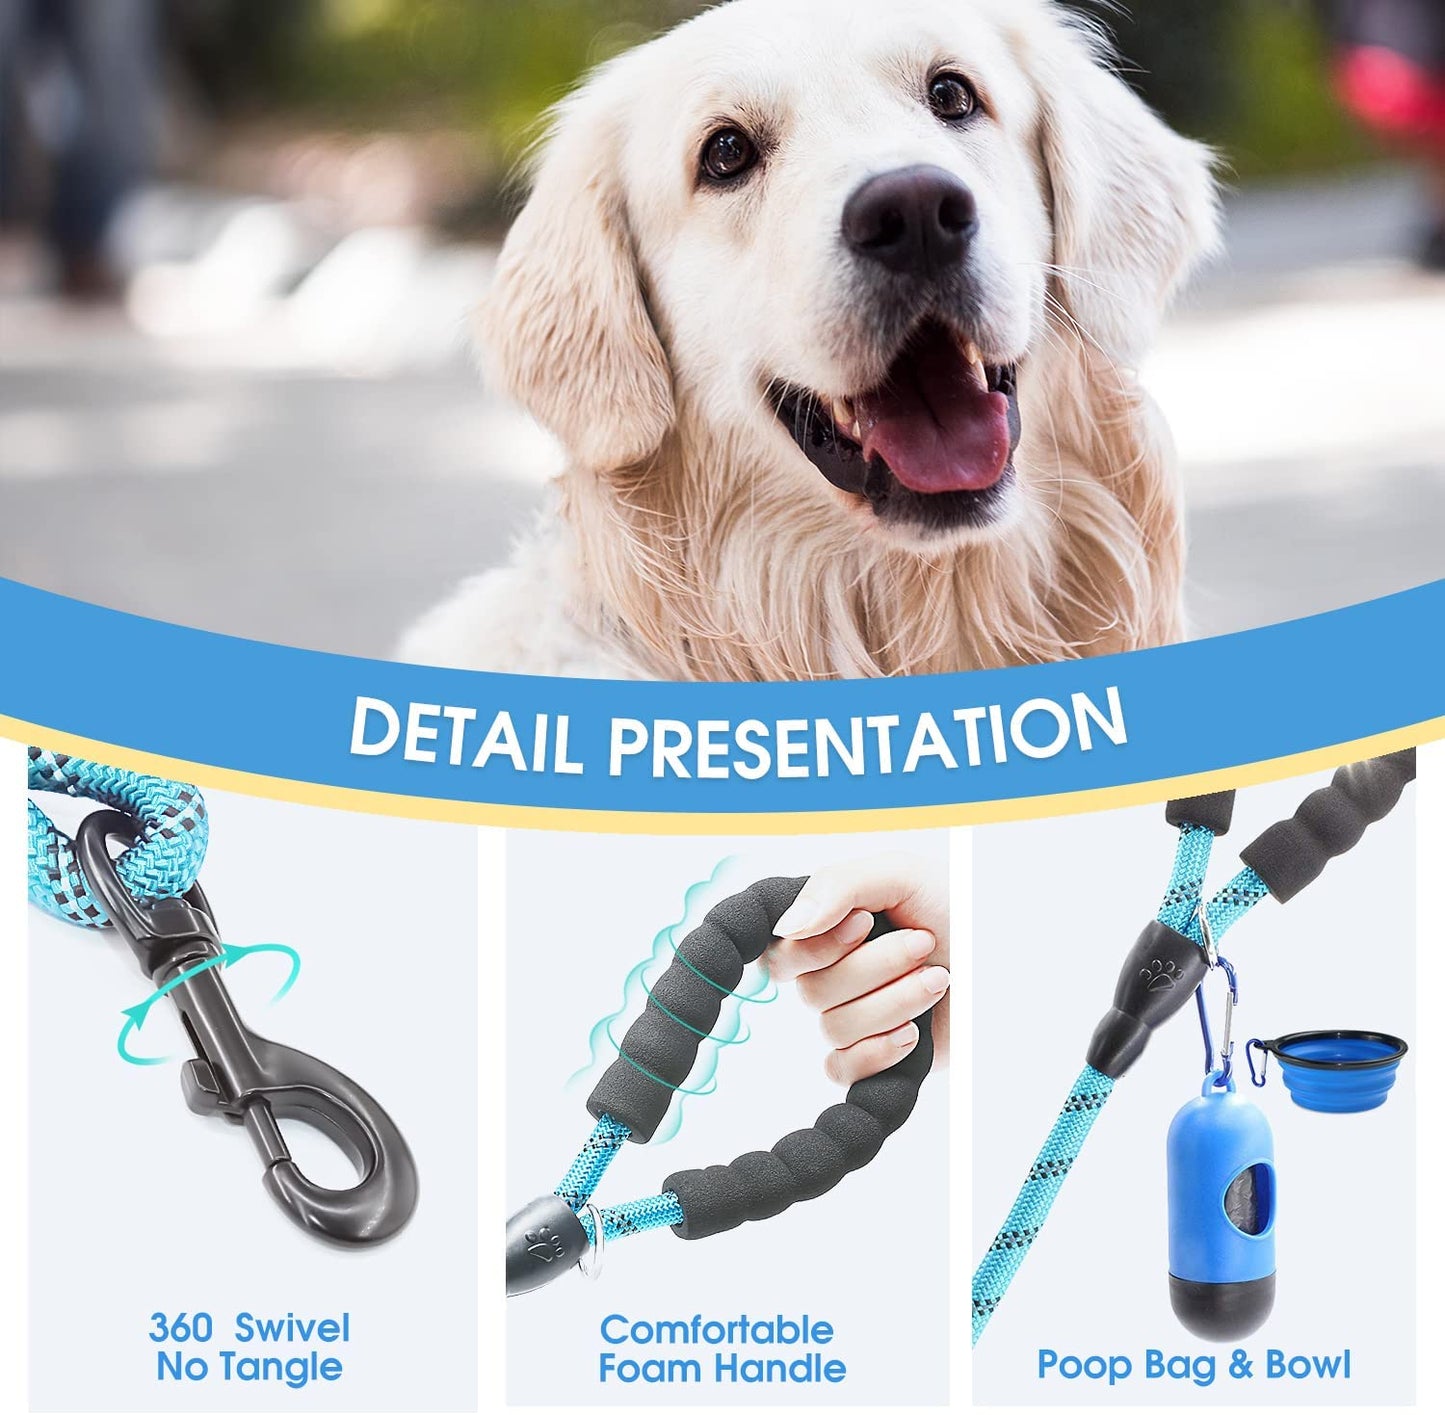 BAAPET 2 Packs 5/6 FT Dog Leash with Comfortable Padded Handle and Highly Reflective Threads Dog Leashes for Small Medium and Large Dogs (5FT-1/2'', Black+Blue)